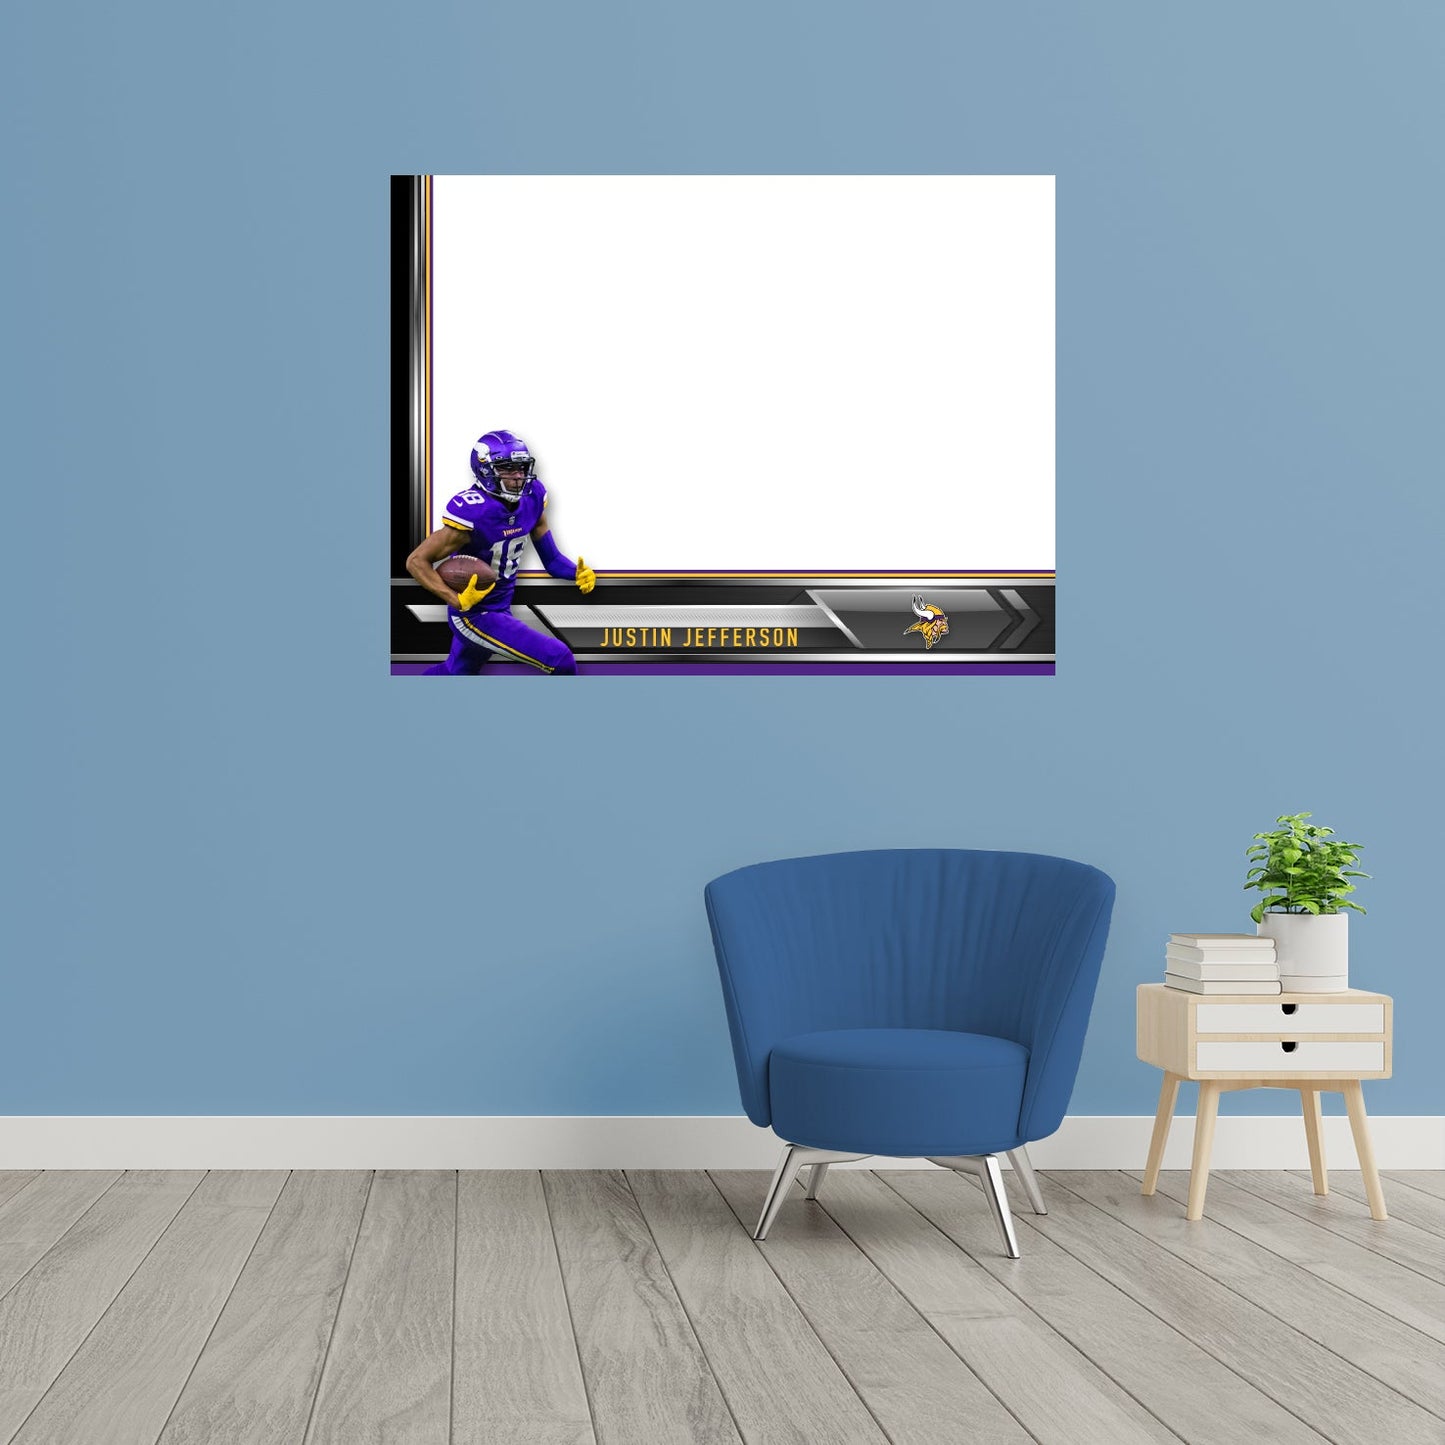 Minnesota Vikings: Justin Jefferson Dry Erase Whiteboard - Officially Licensed NFL Removable Adhesive Decal